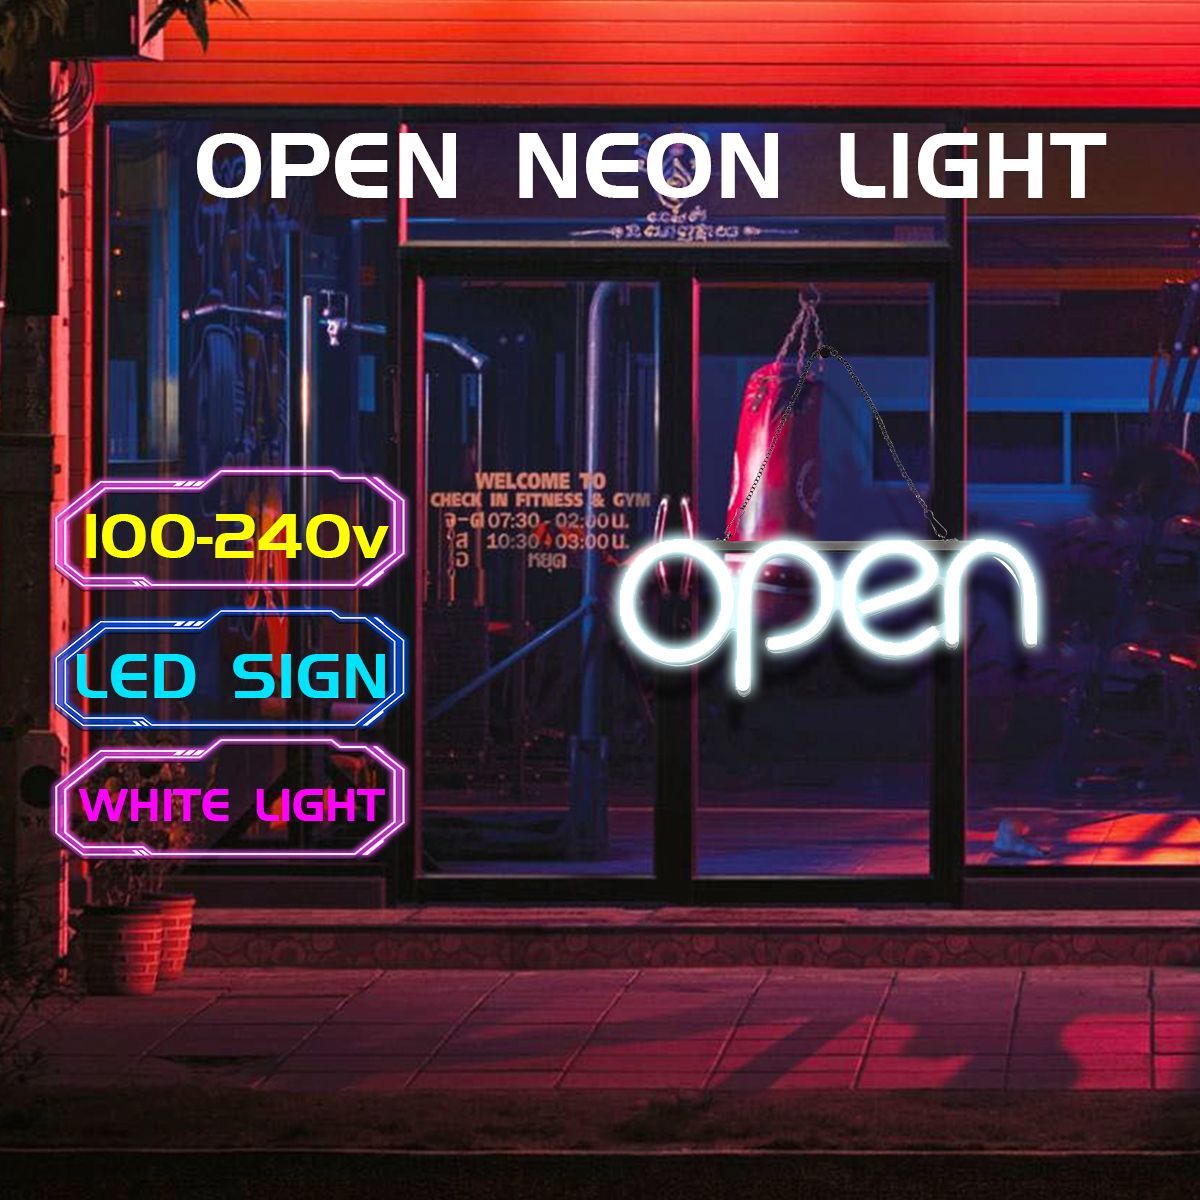 16x7-OPEN-Neon-Sign-Light-Pub-Party-Home-Room-Wall-Hanging-Lamp-Decorations-1632486